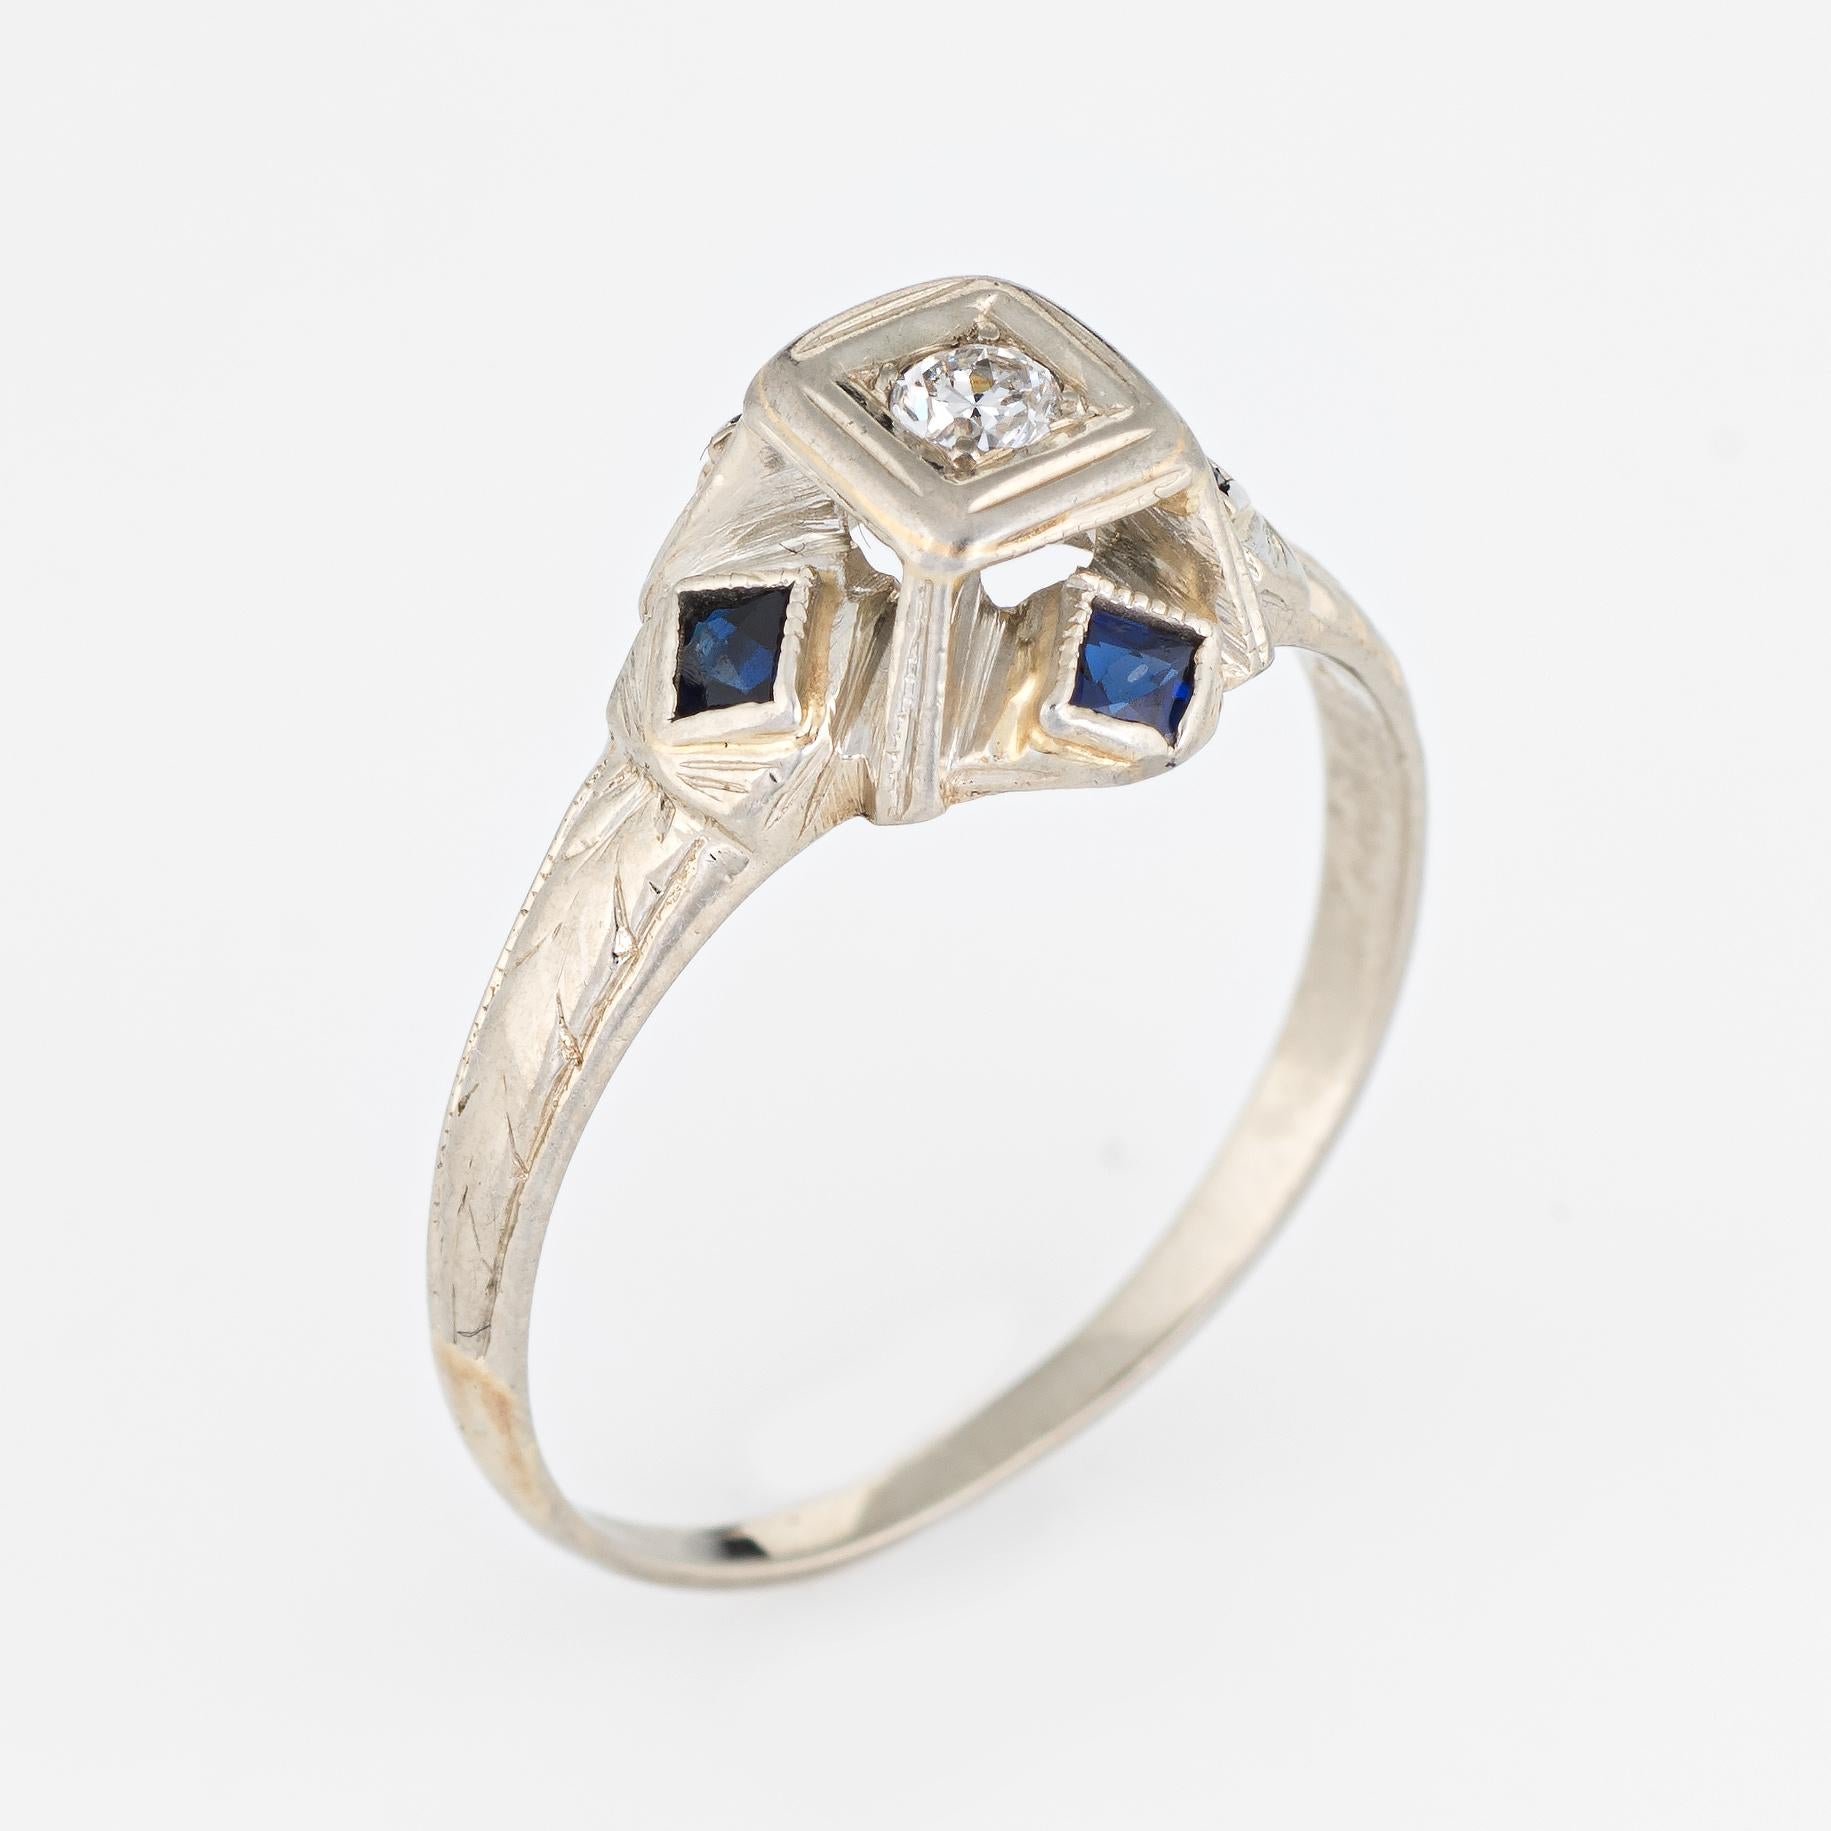 Finely detailed vintage Art Deco era ring (circa 1920s to 1930s) crafted in 20 karat white gold. 

Centrally mounted estimated 0.05 carat old European cut diamond (estimated at H-I color and VS2 clarity). Four French cut sapphires (synthetic) are